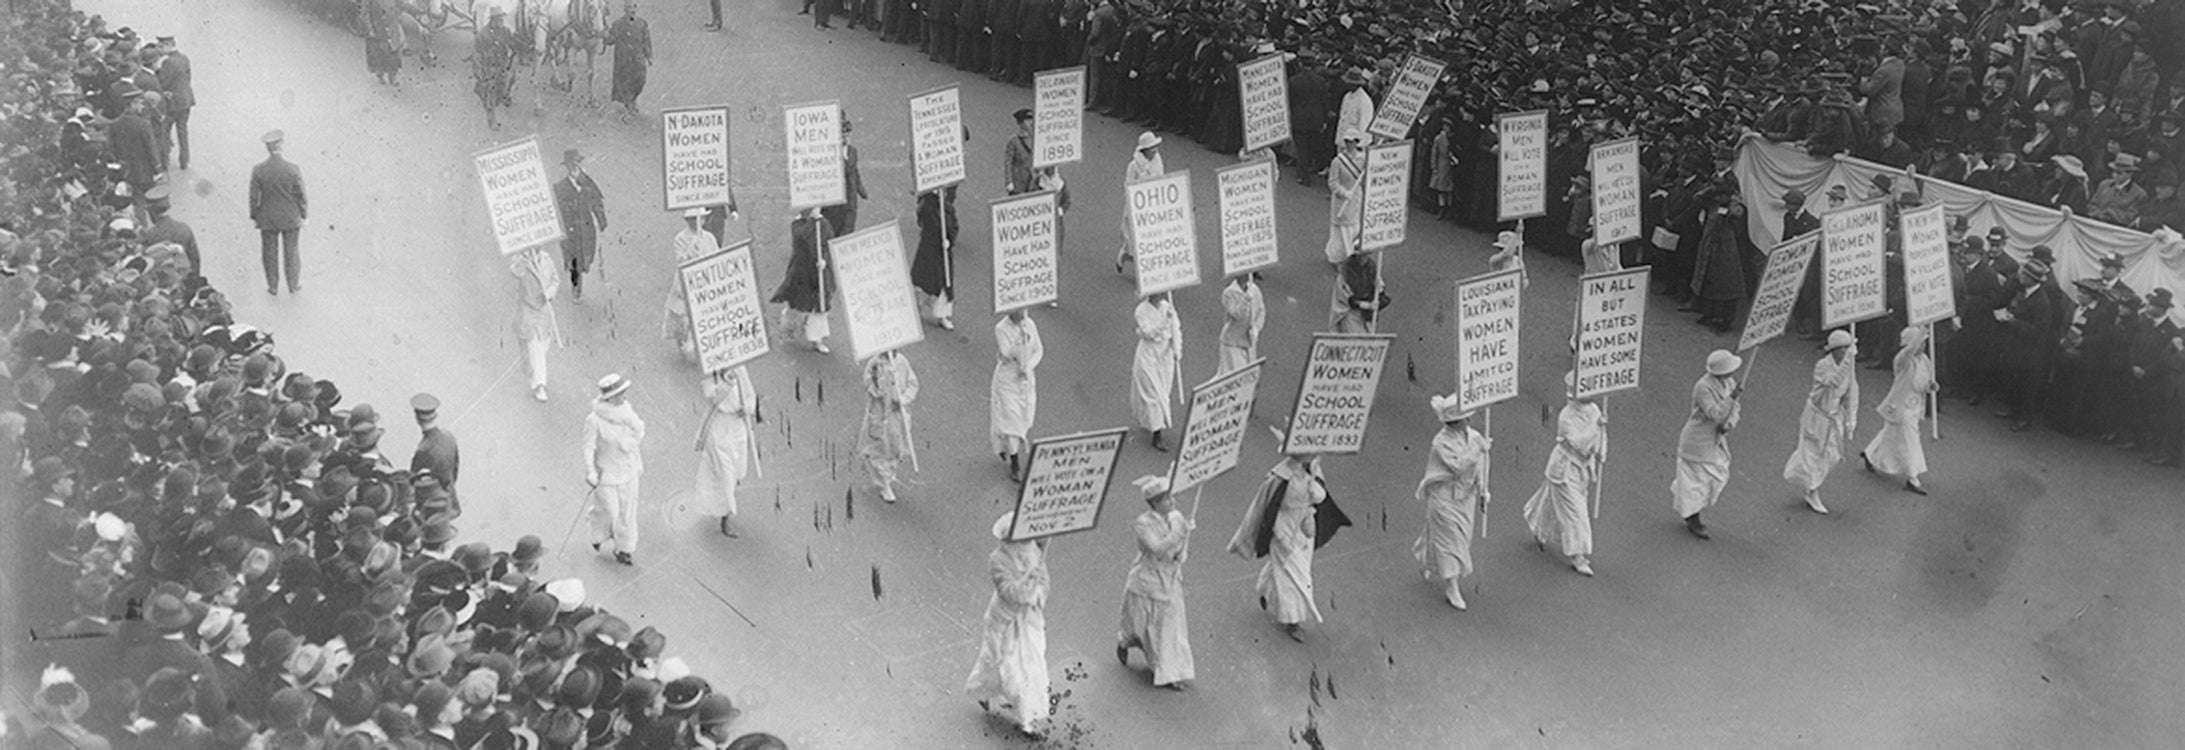 SUFFRAGE AT 100, News Services